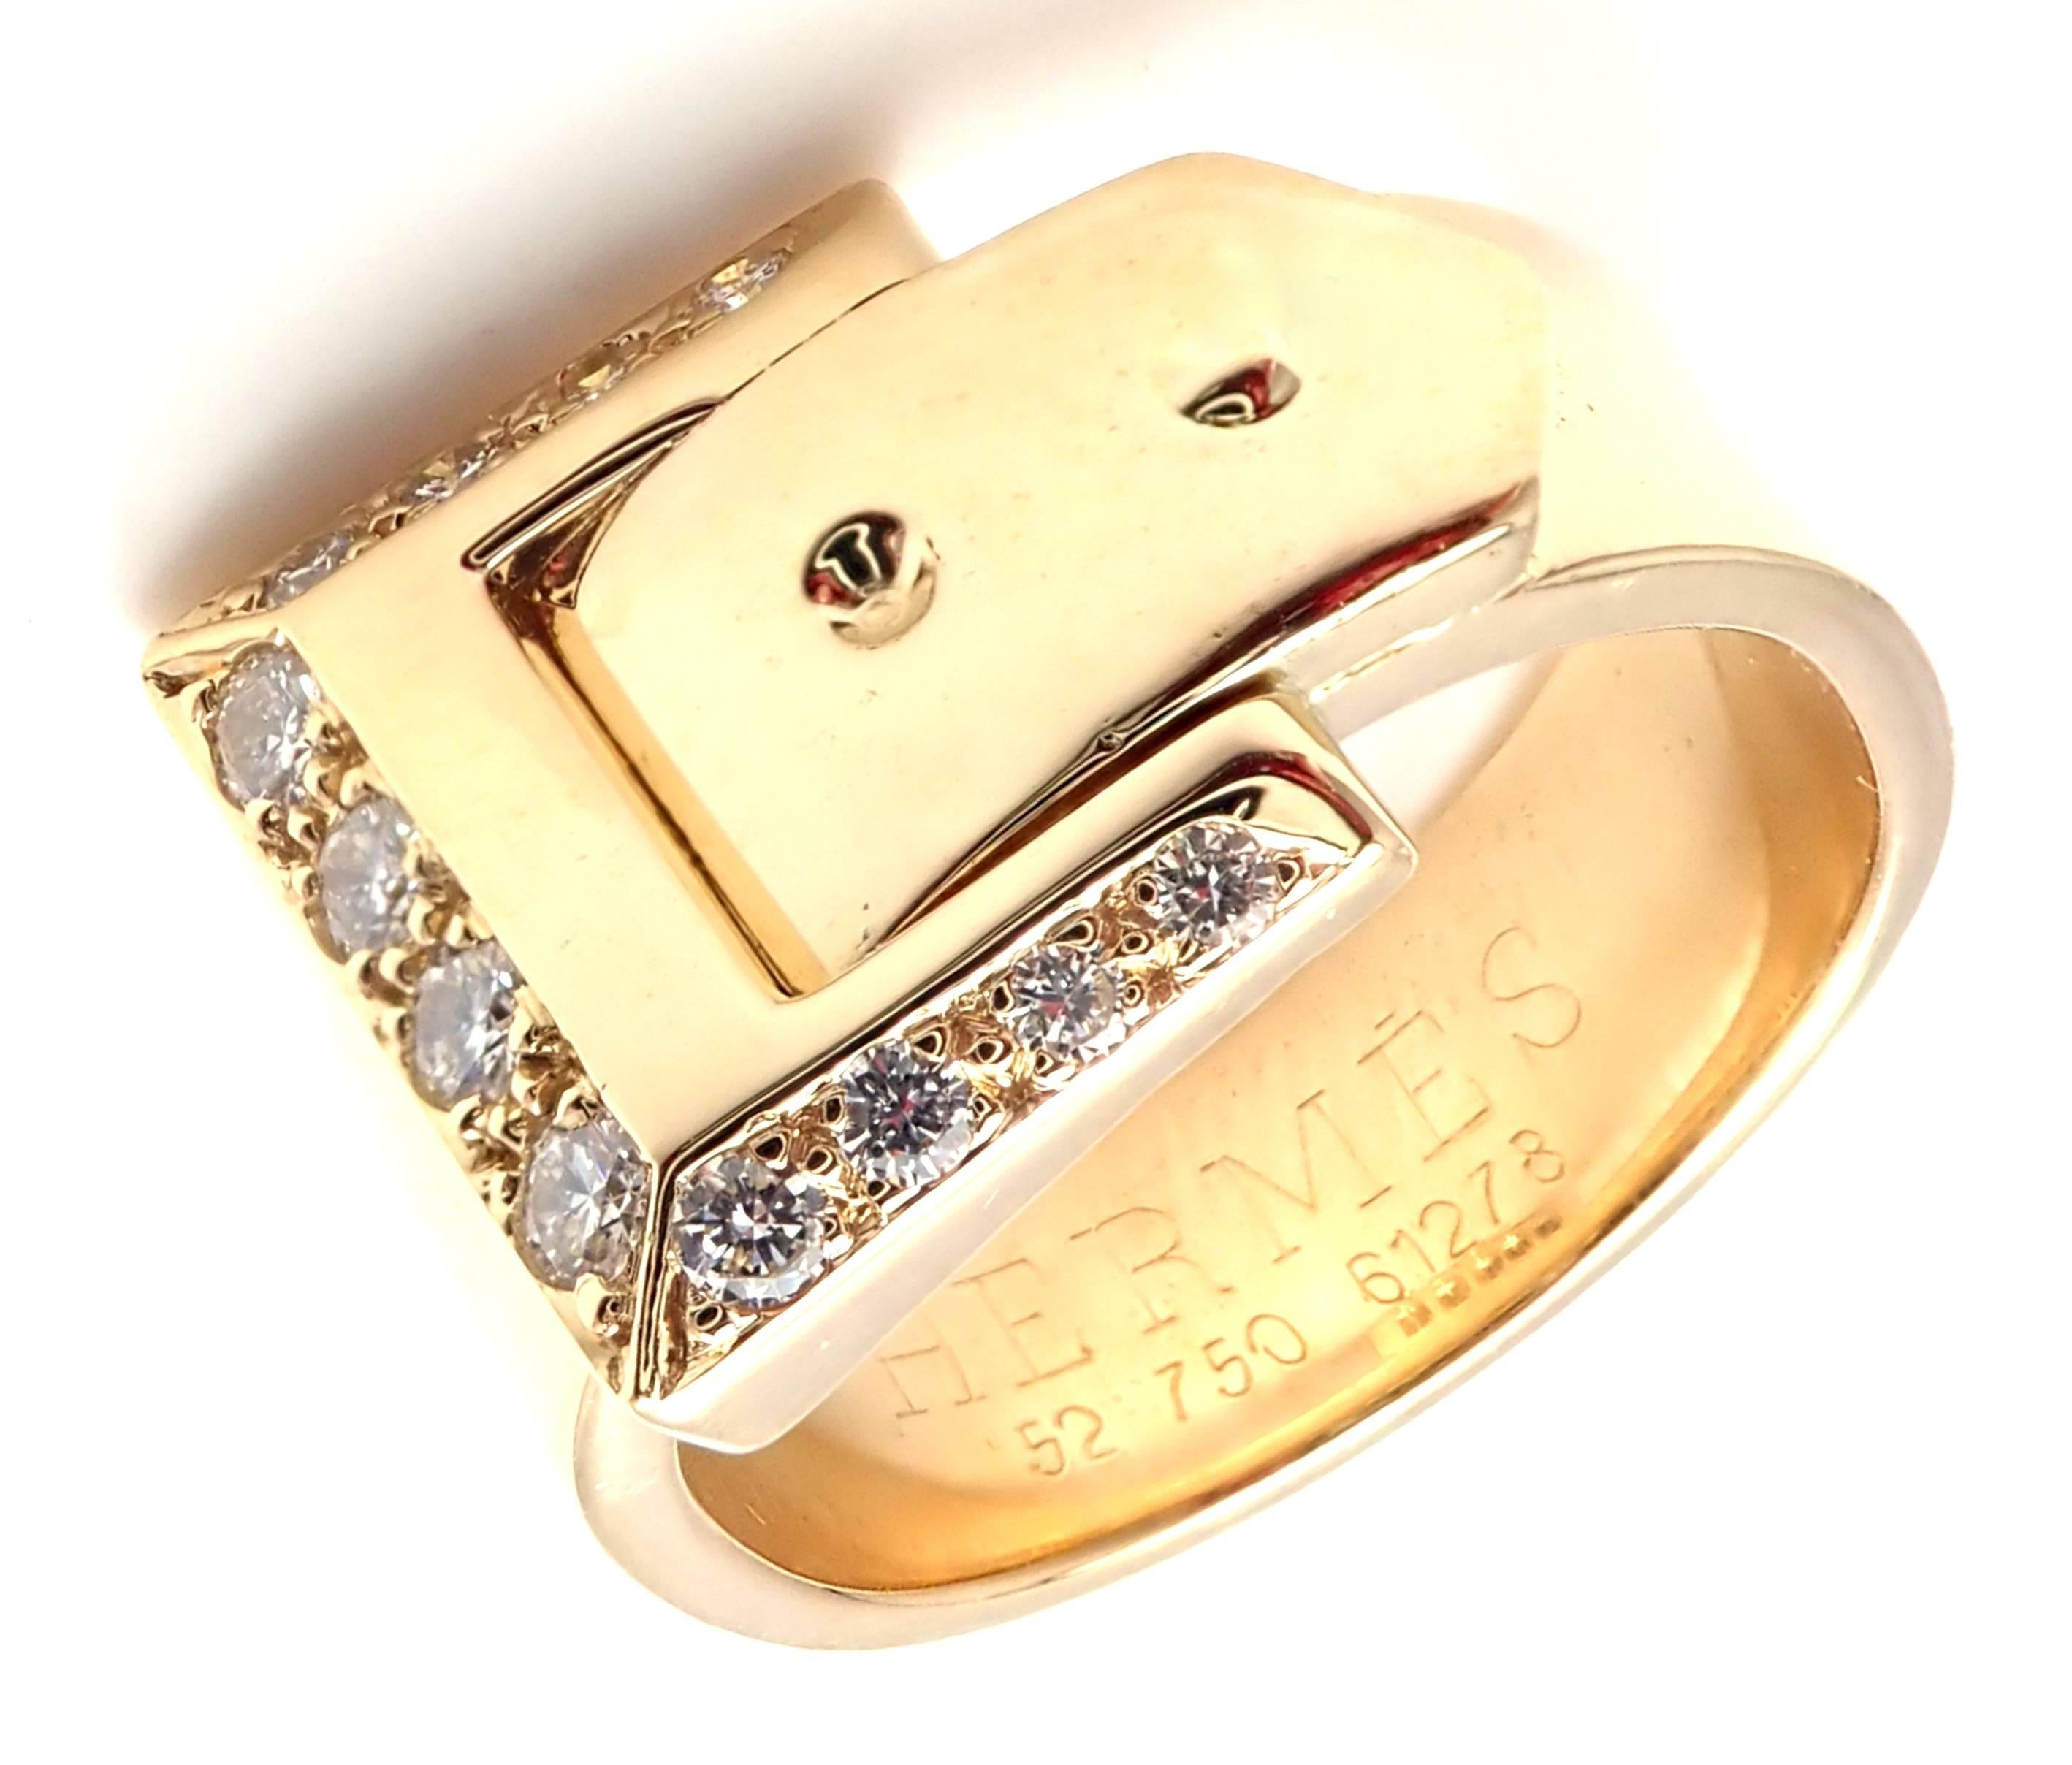 18k Yellow Gold Diamond Wide Buckle Band Ring by Hermes. 
With 12 round brilliant cut diamonds VVS1 clarity G color total weight approx. .20ct
Details: 
Ring Size: European 52, US 6
Weight: 10.4 grams
Width: 11mm
Stamped Hallmarks: HERMES 750  52